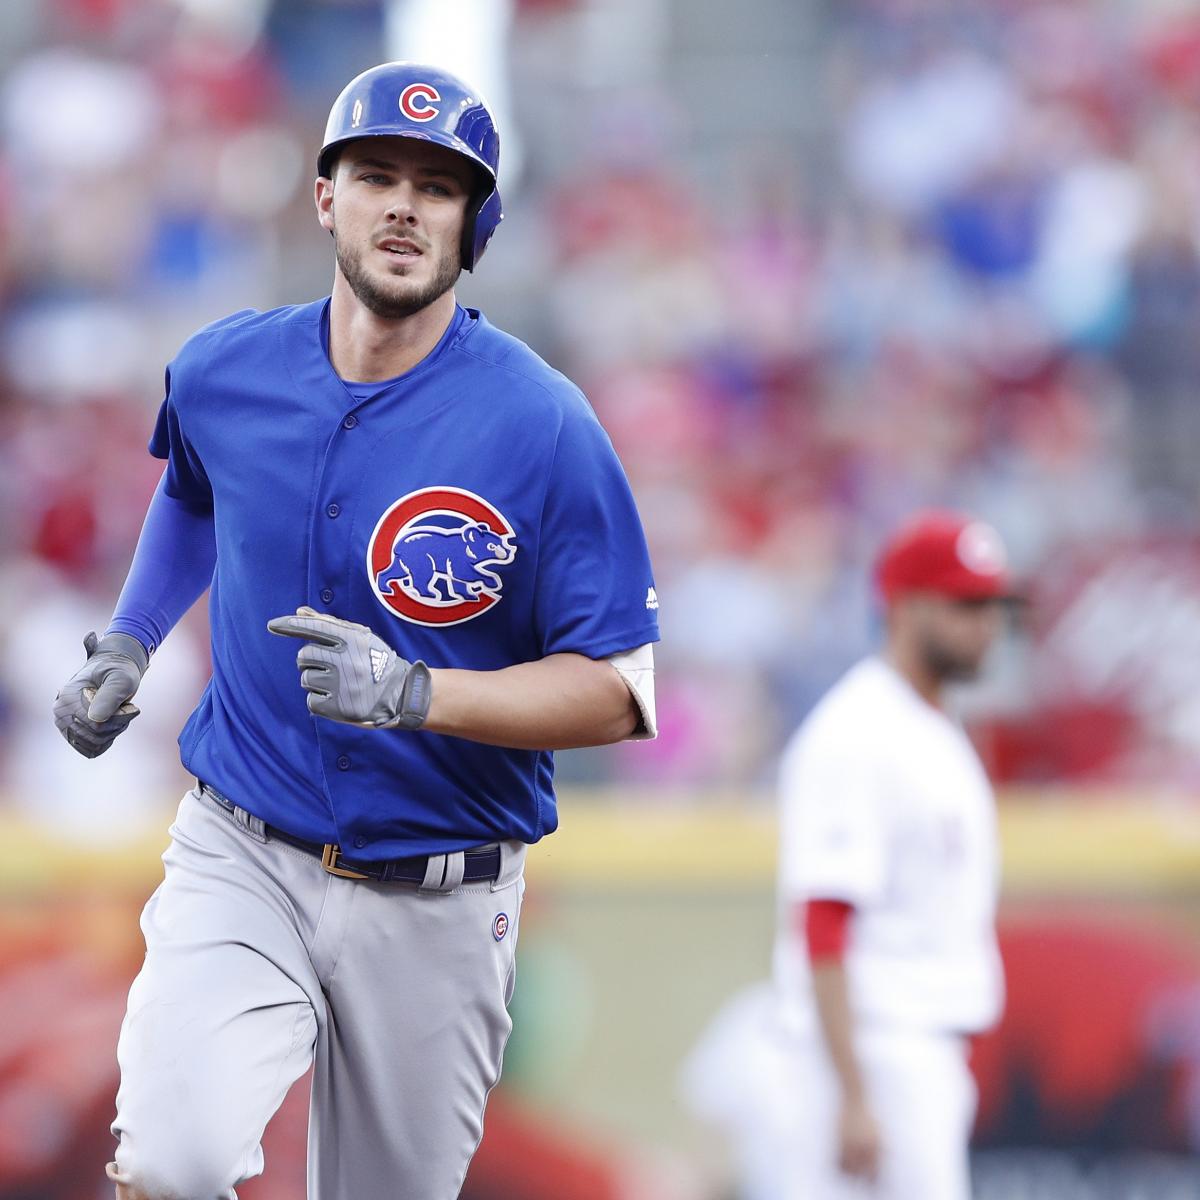 Kris Bryant Is the Youngest Cubs Player to Hit 3Plus Home Runs in a